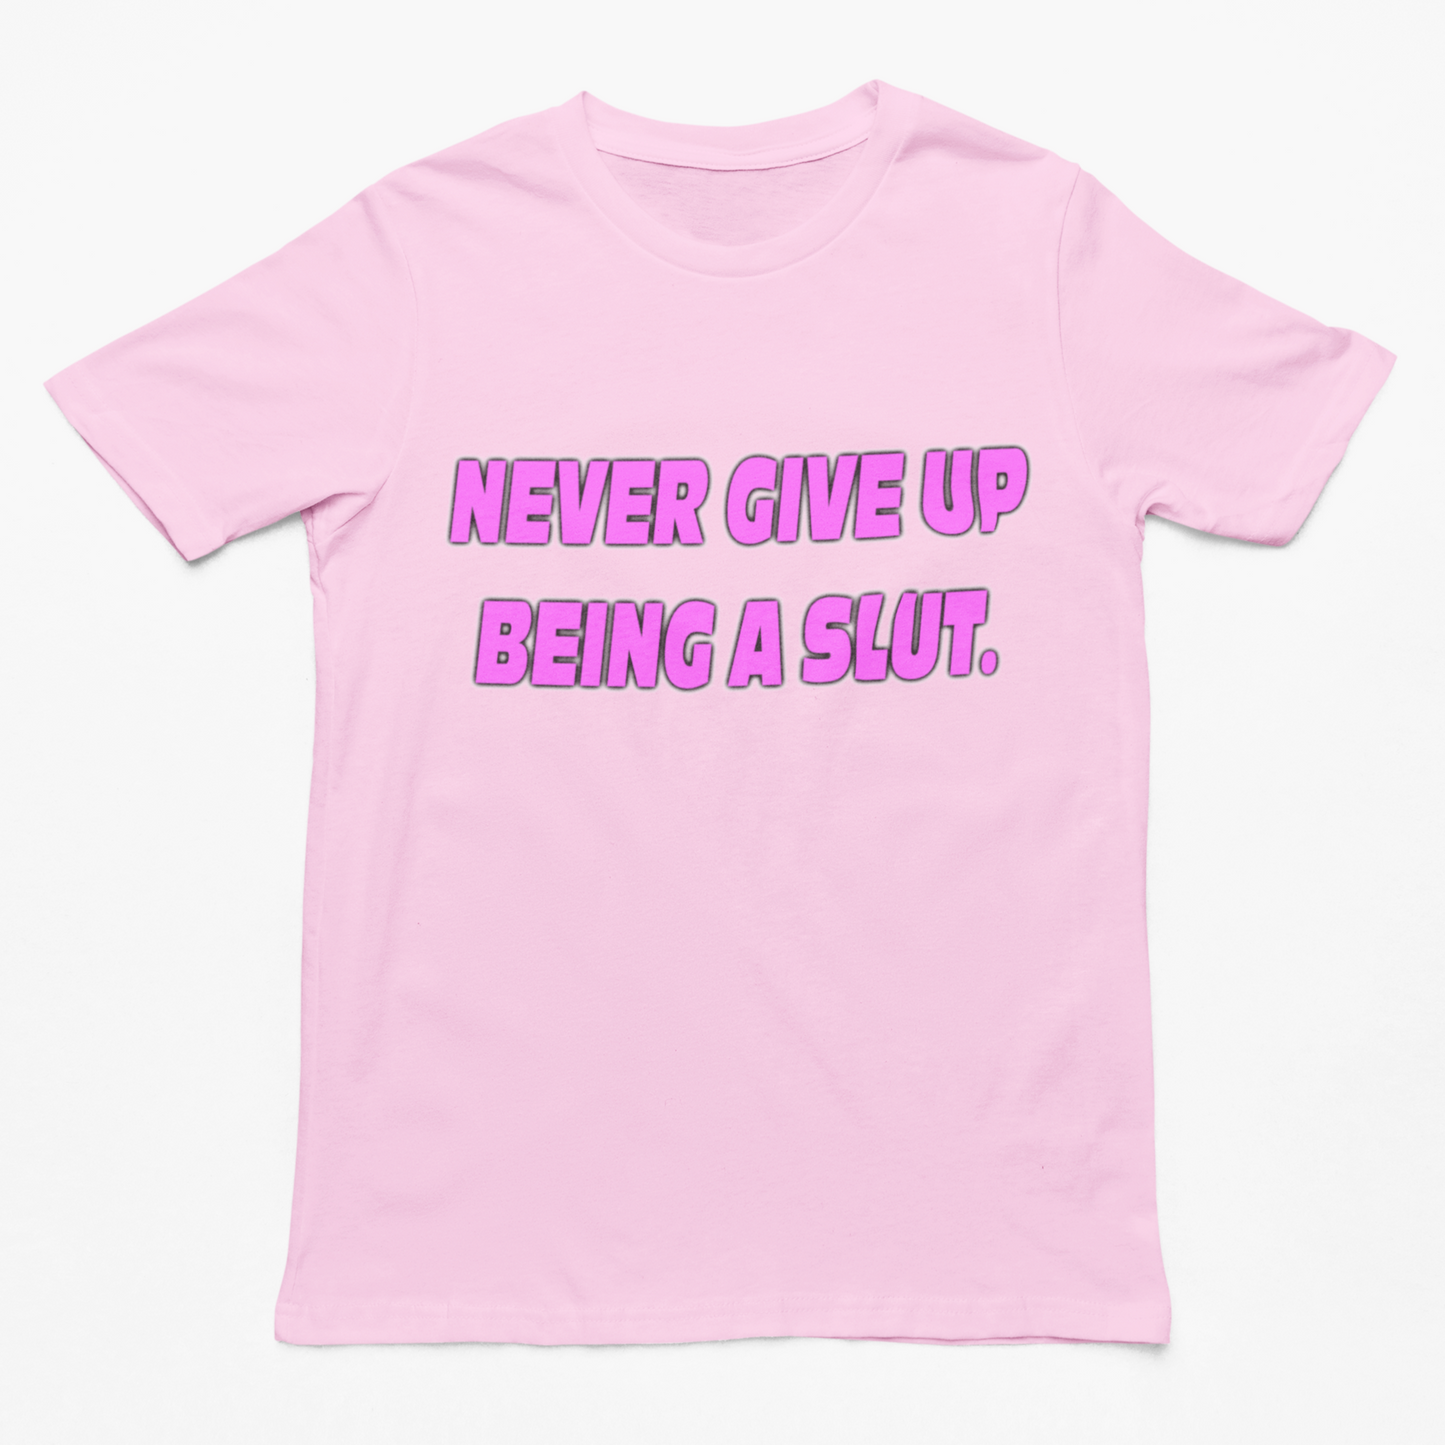 Never Give Up Being a Slut t-shirt